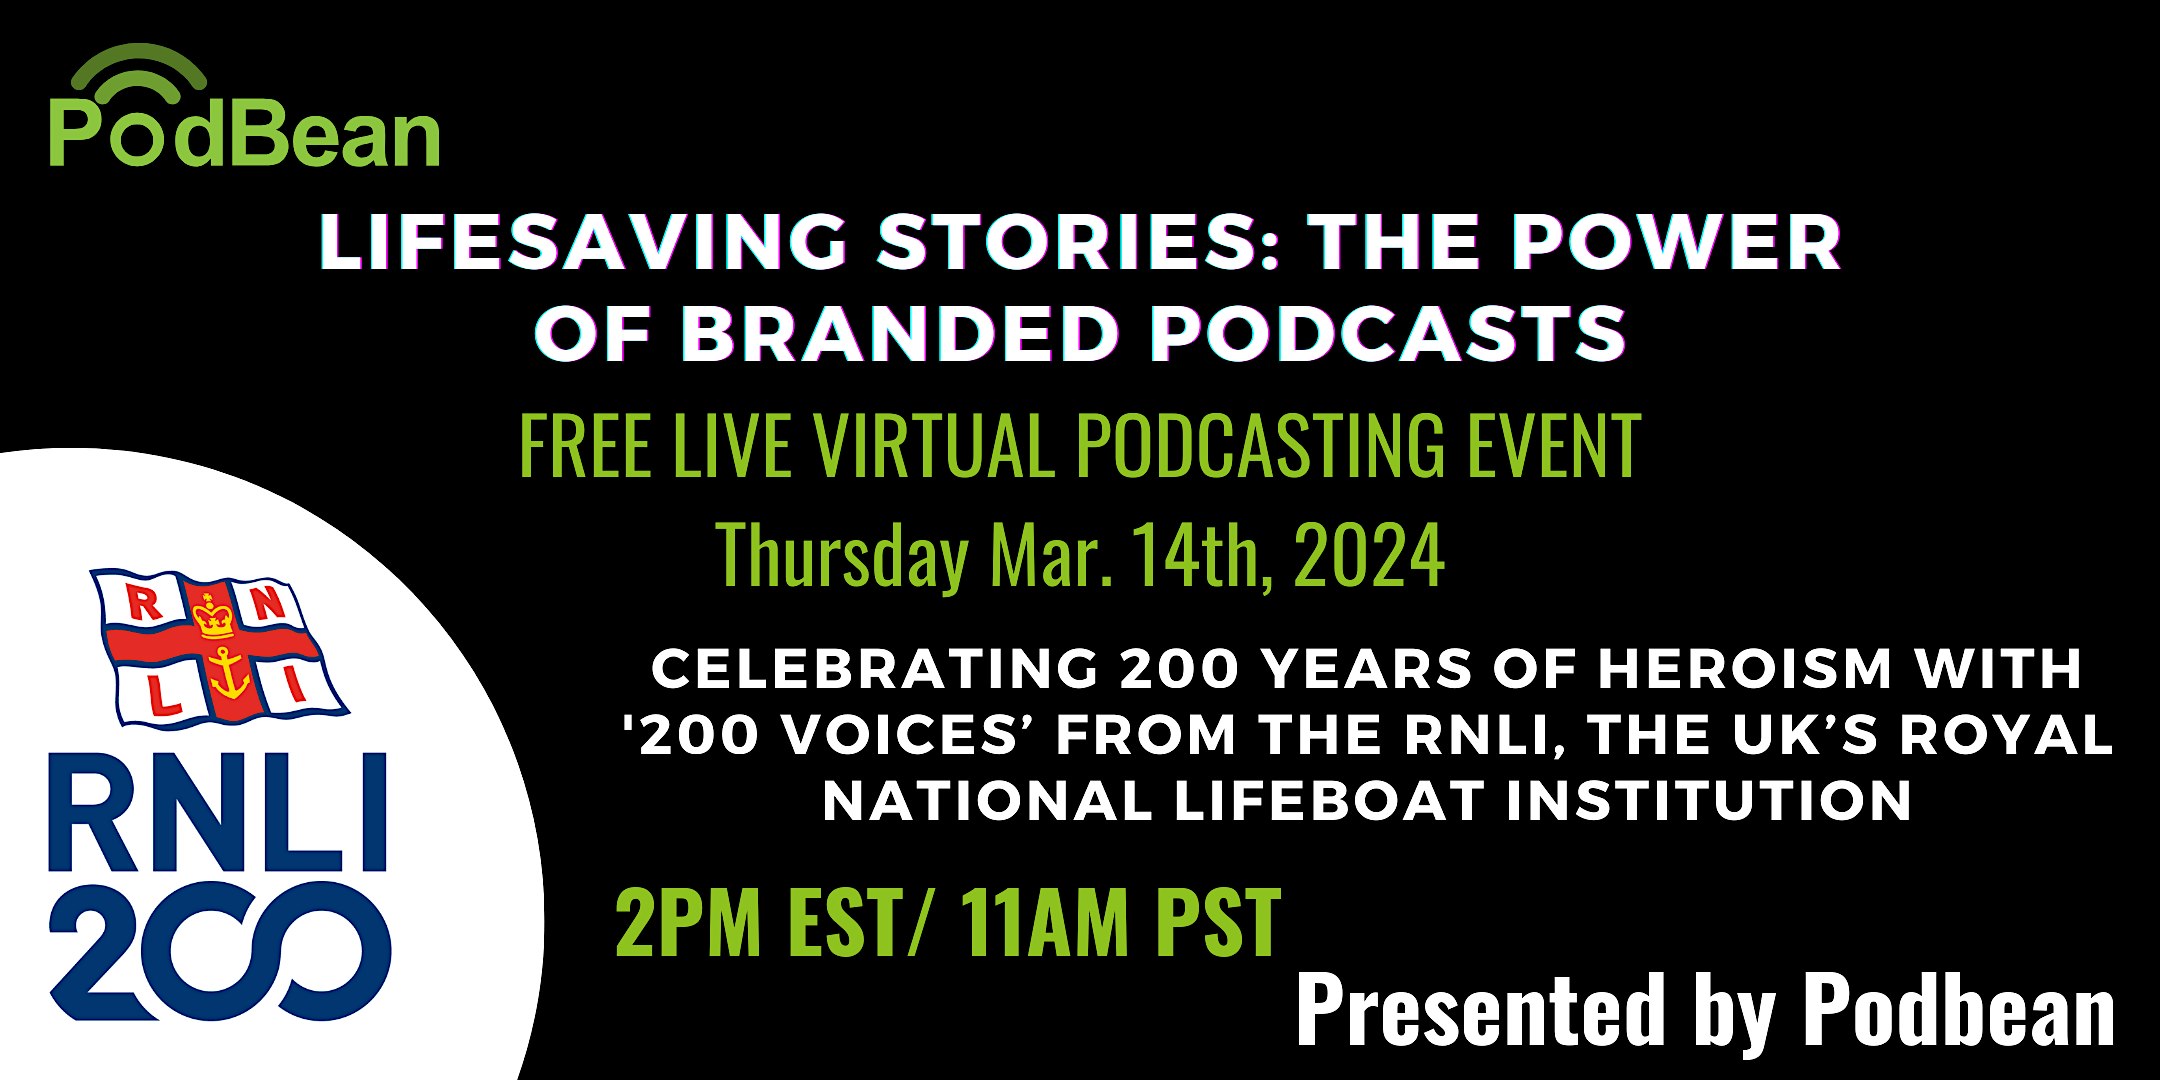 Lifesaving Stories: The Power of Branded Podcasts